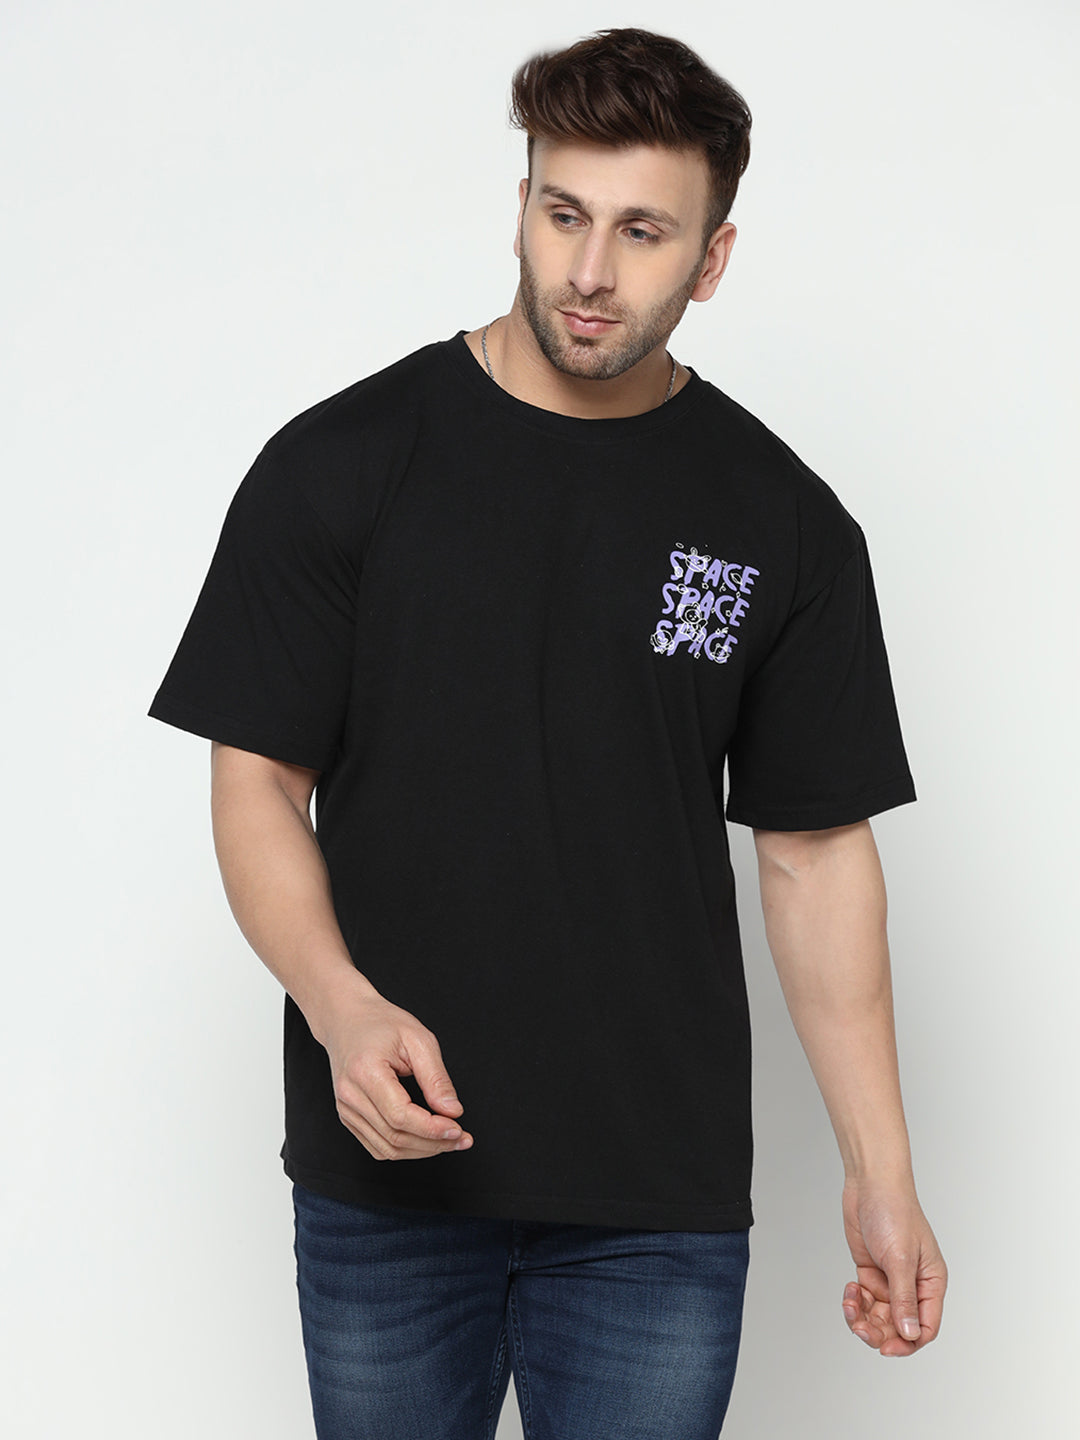 Oversized Black Half Sleeve Front and Back Space Printed T-Shirt